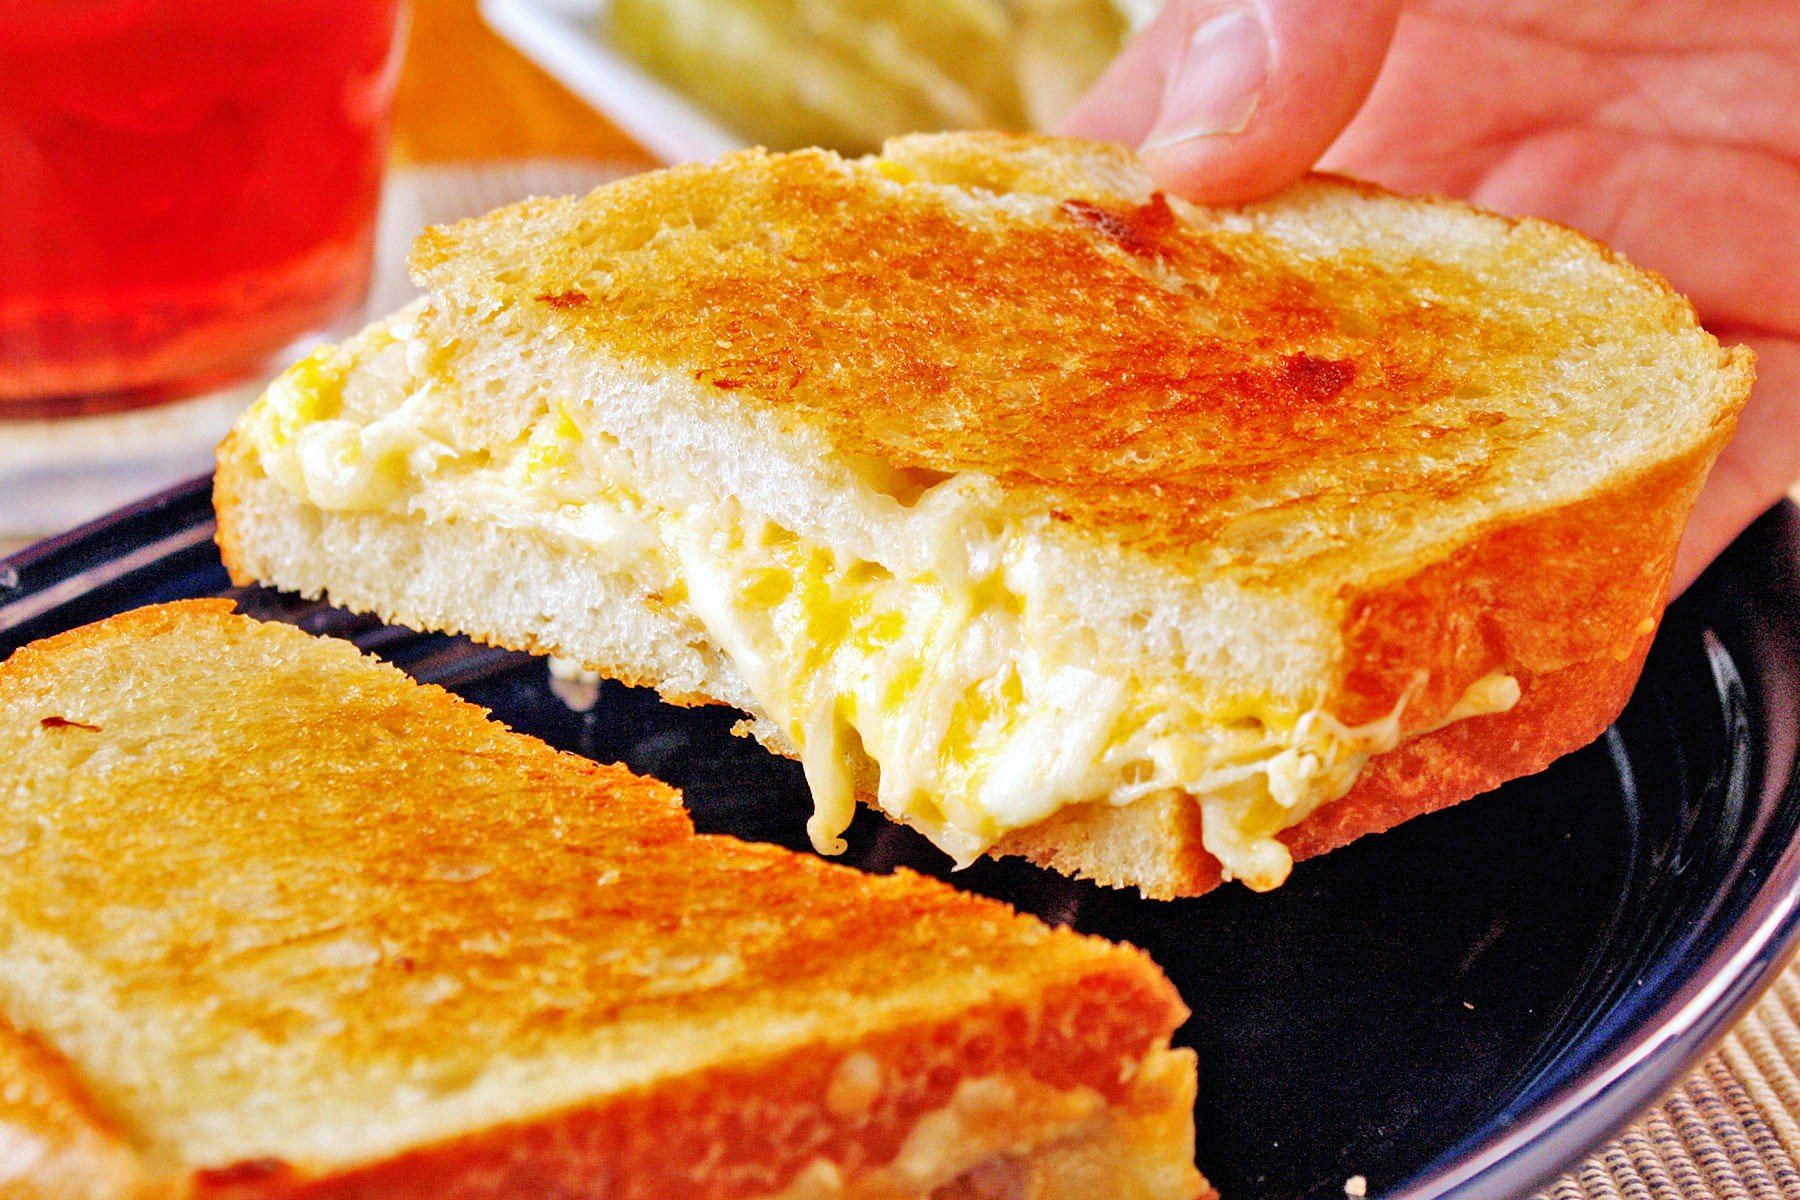 https://irepo.primecp.com/2019/10/426514/Ultimate-Grilled-Cheese-Sandwich_Edit-crop_UserCommentImage_ID-3413699.jpg?v=3413699